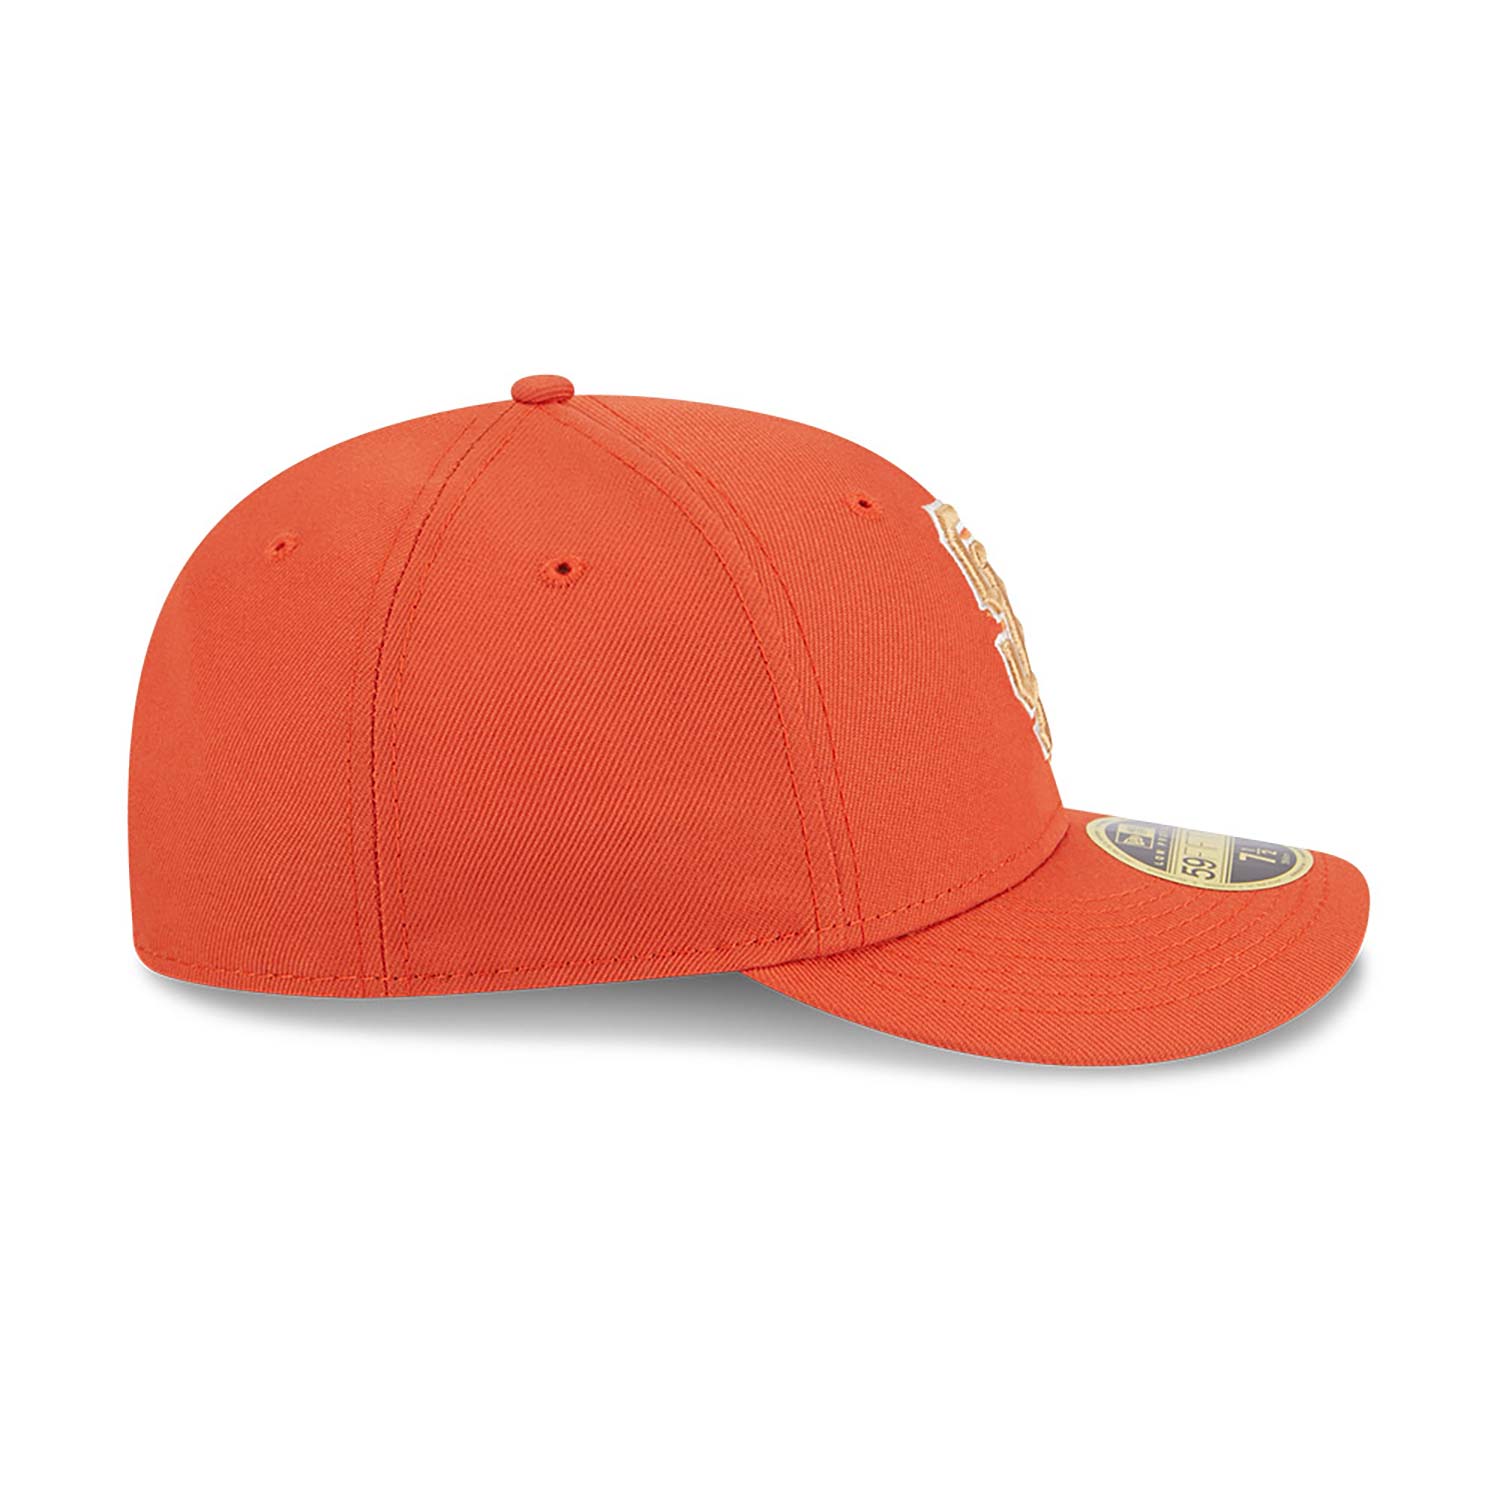 San Francisco Giants Repreve Orange Low Profile 59FIFTY Fitted Cap